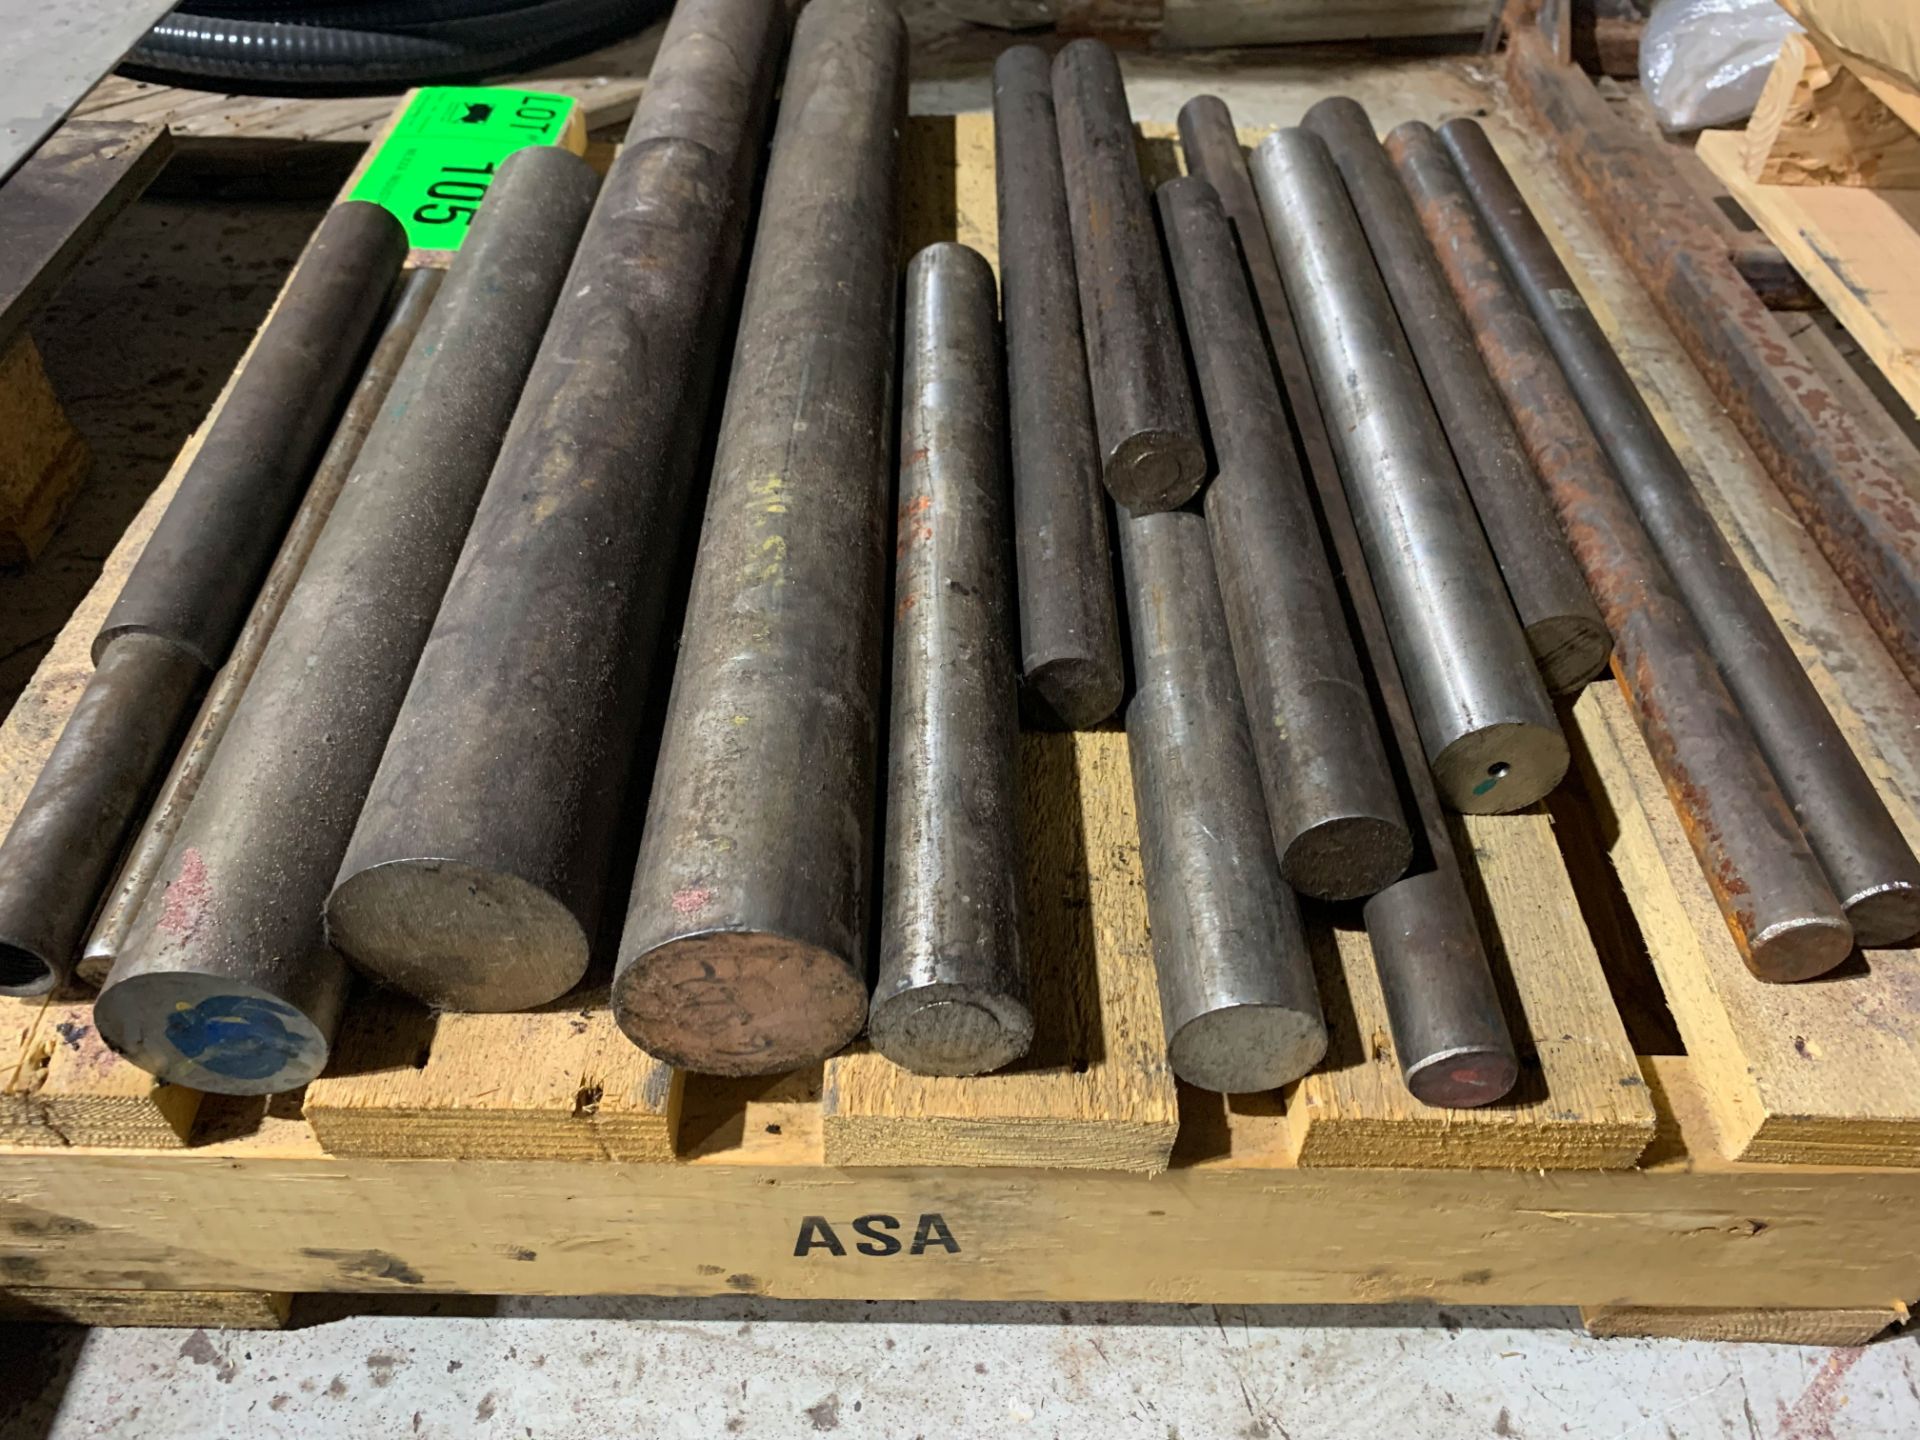 LOT/ PALLET WITH CONTENTS CONSISTING OF STEEL BAR STOCK [RIGGING FEE FOR LOT #105 - $TBD CAD PLUS - Image 2 of 2